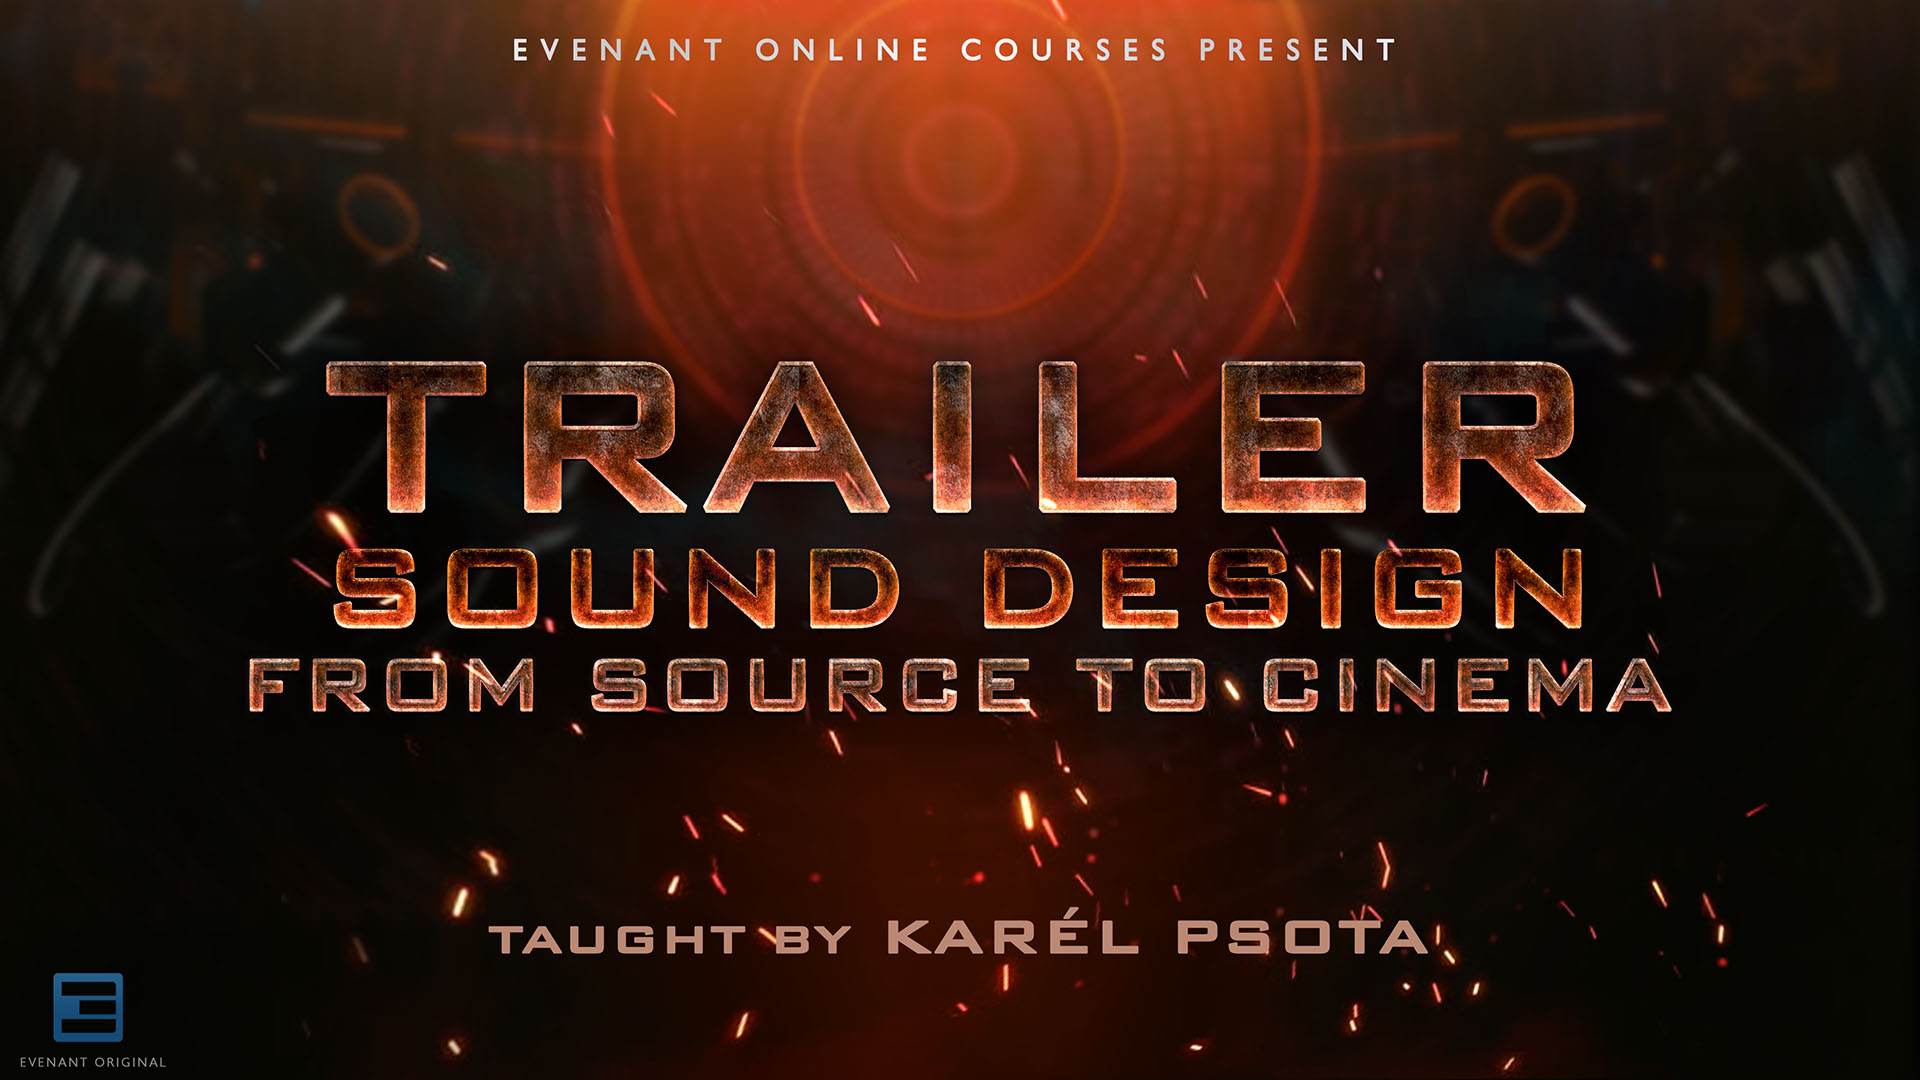 Trailer New Course – Sound Design: From Source To Cinema